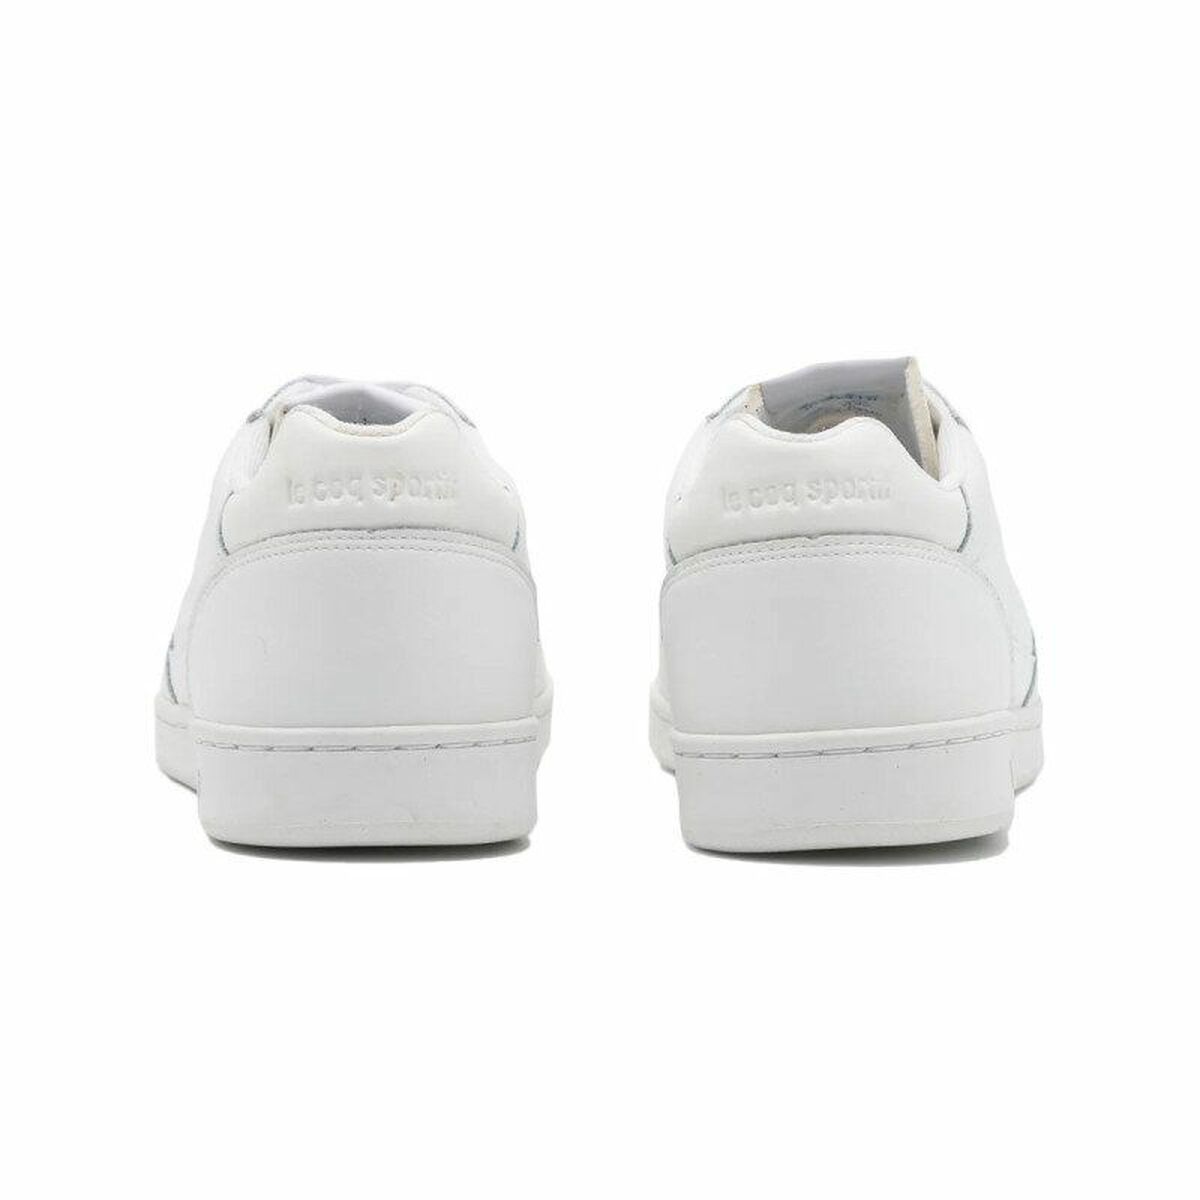 Chaussures casual unisex Le coq sportif Breakpoint Blanc